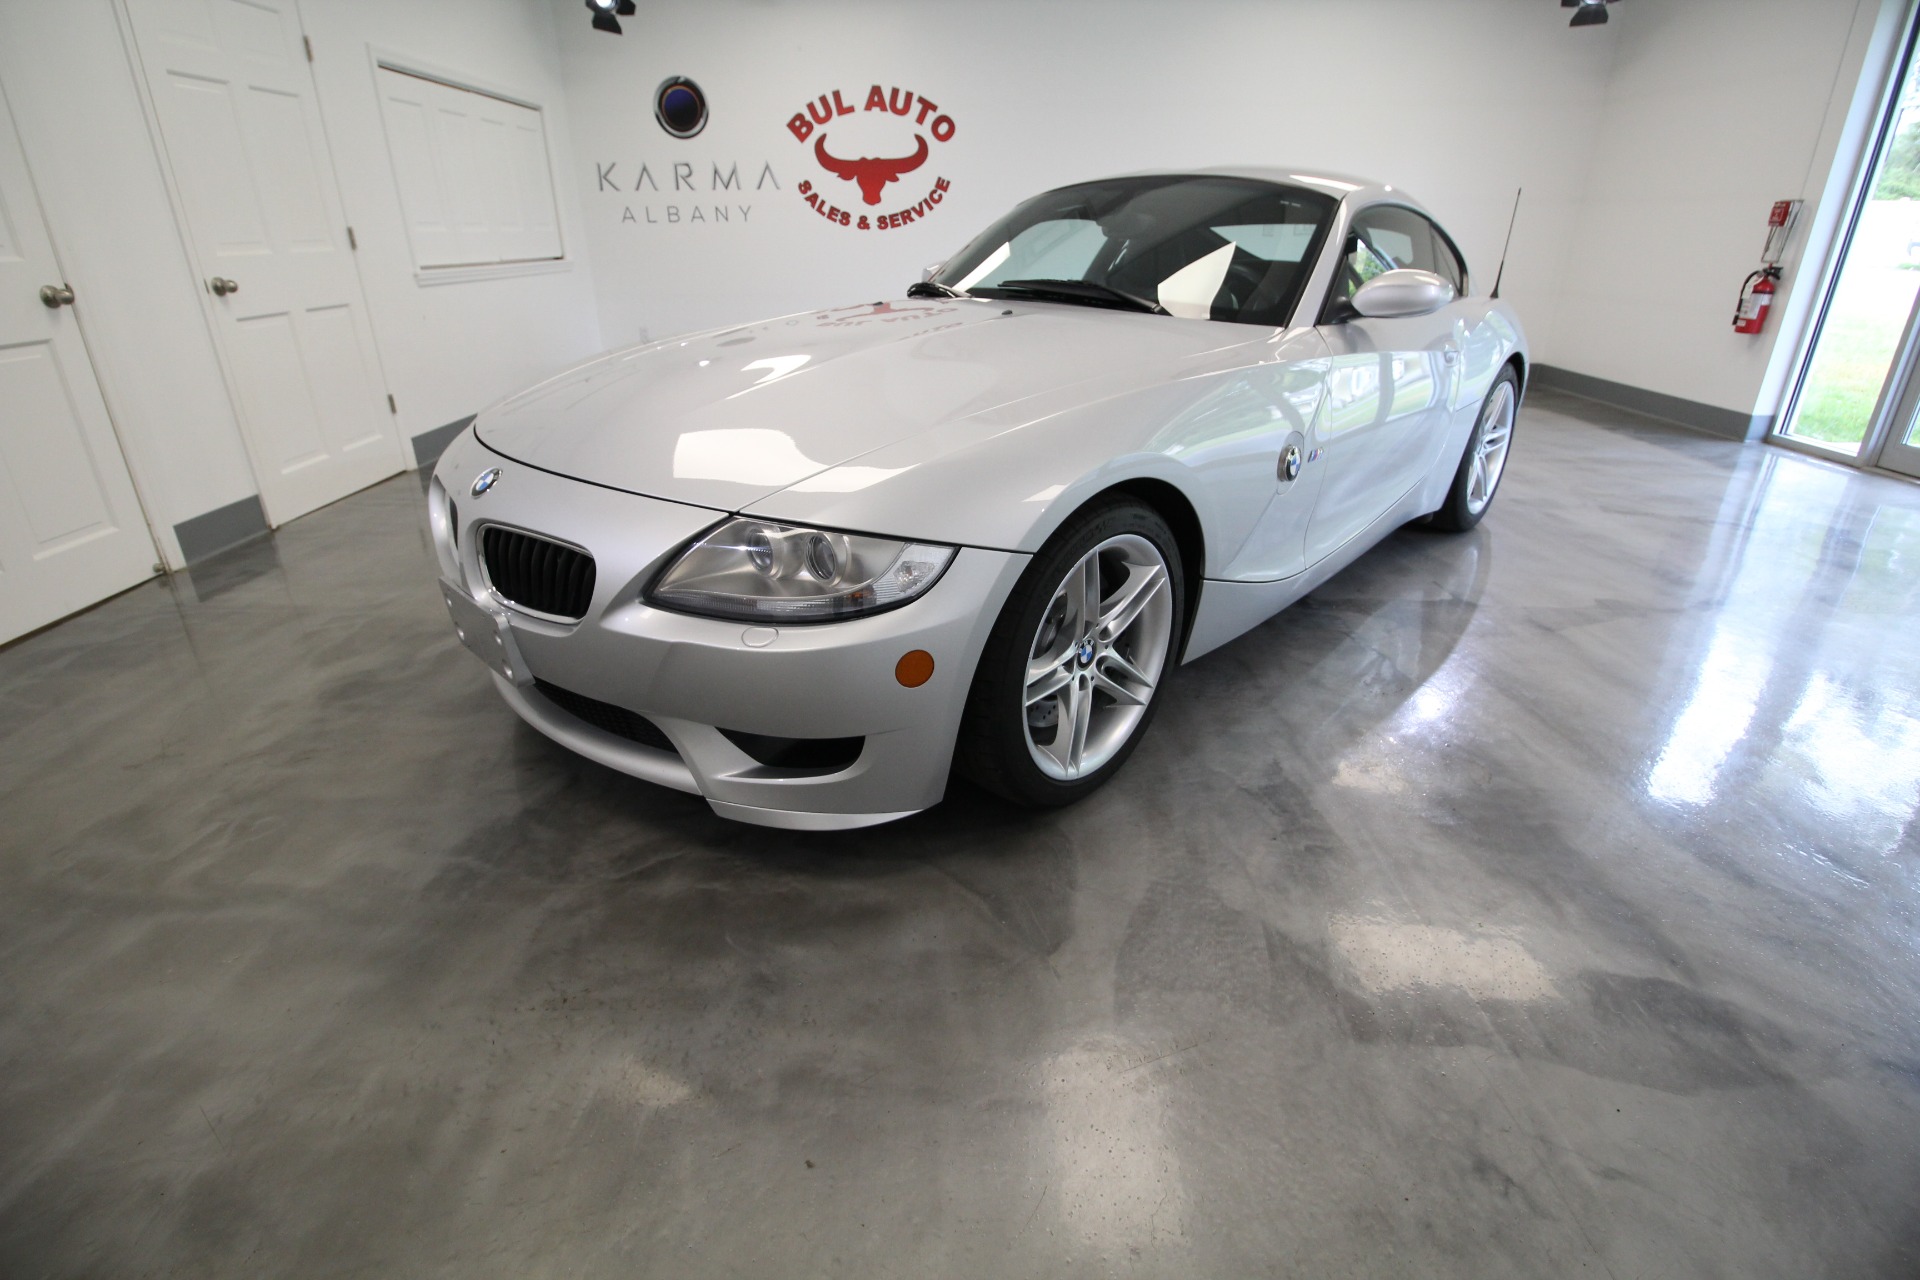 Used 2008 Titanium Silver Metallic BMW BMW Z4 M Coupe RARE - VERY CLEAN - STUNNING | Albany, NY